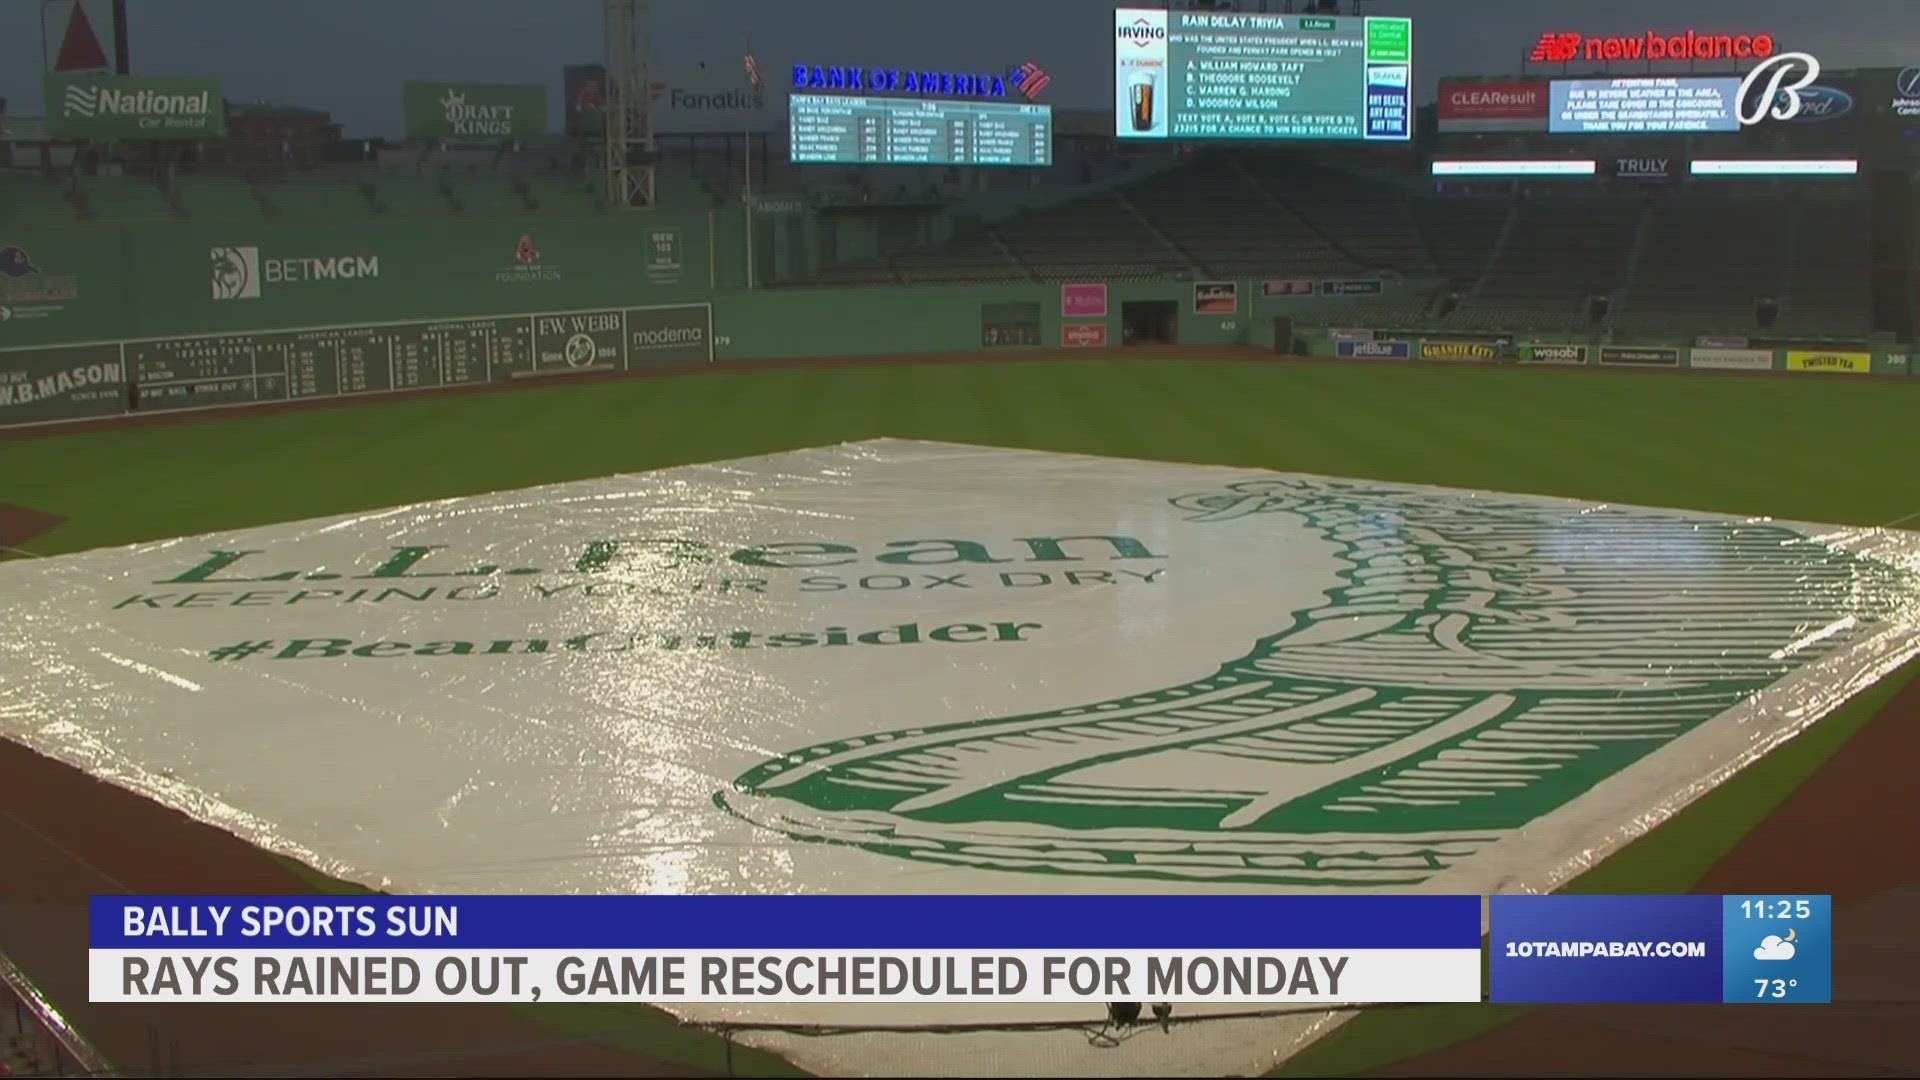 The game was rescheduled to 4:05 p.m. on Monday in Boston.